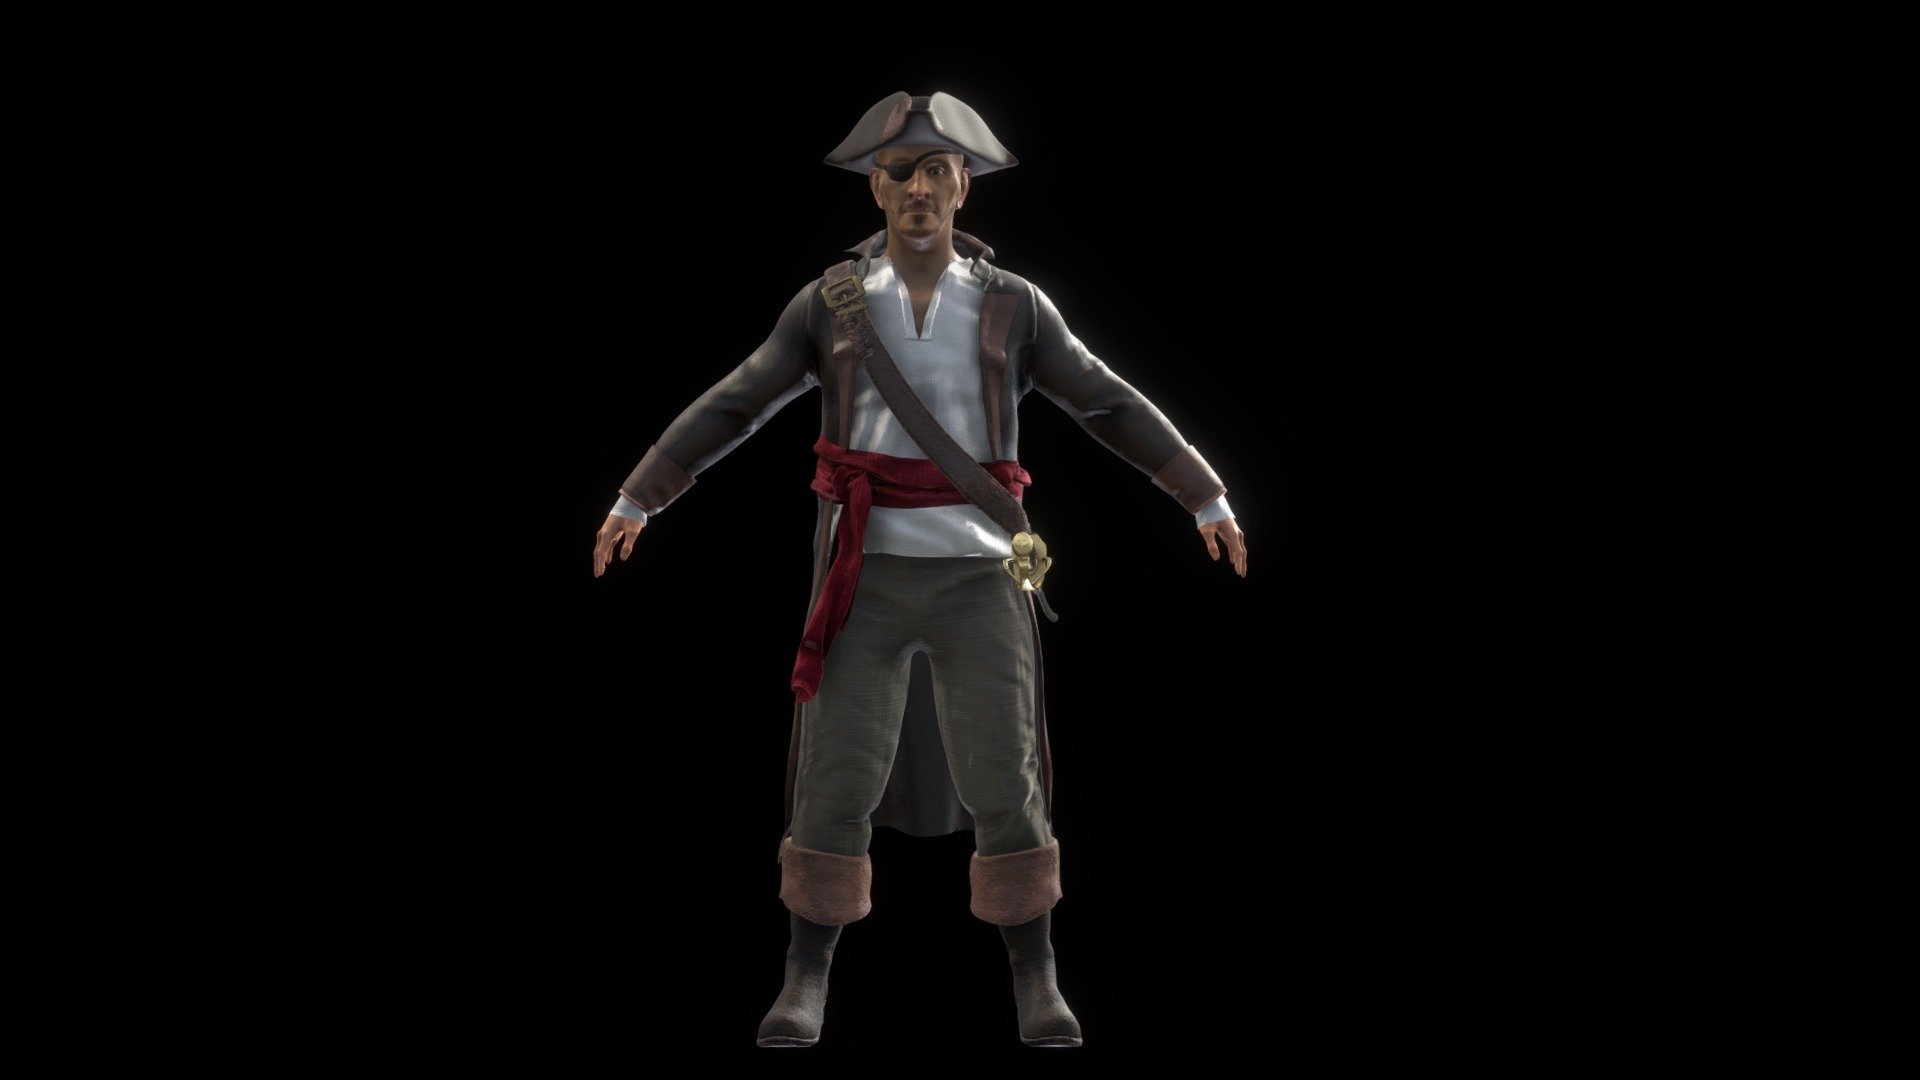 3D character model - Bailey Moss Pirate Model - Download Free 3D model by bailey.moss 3d model